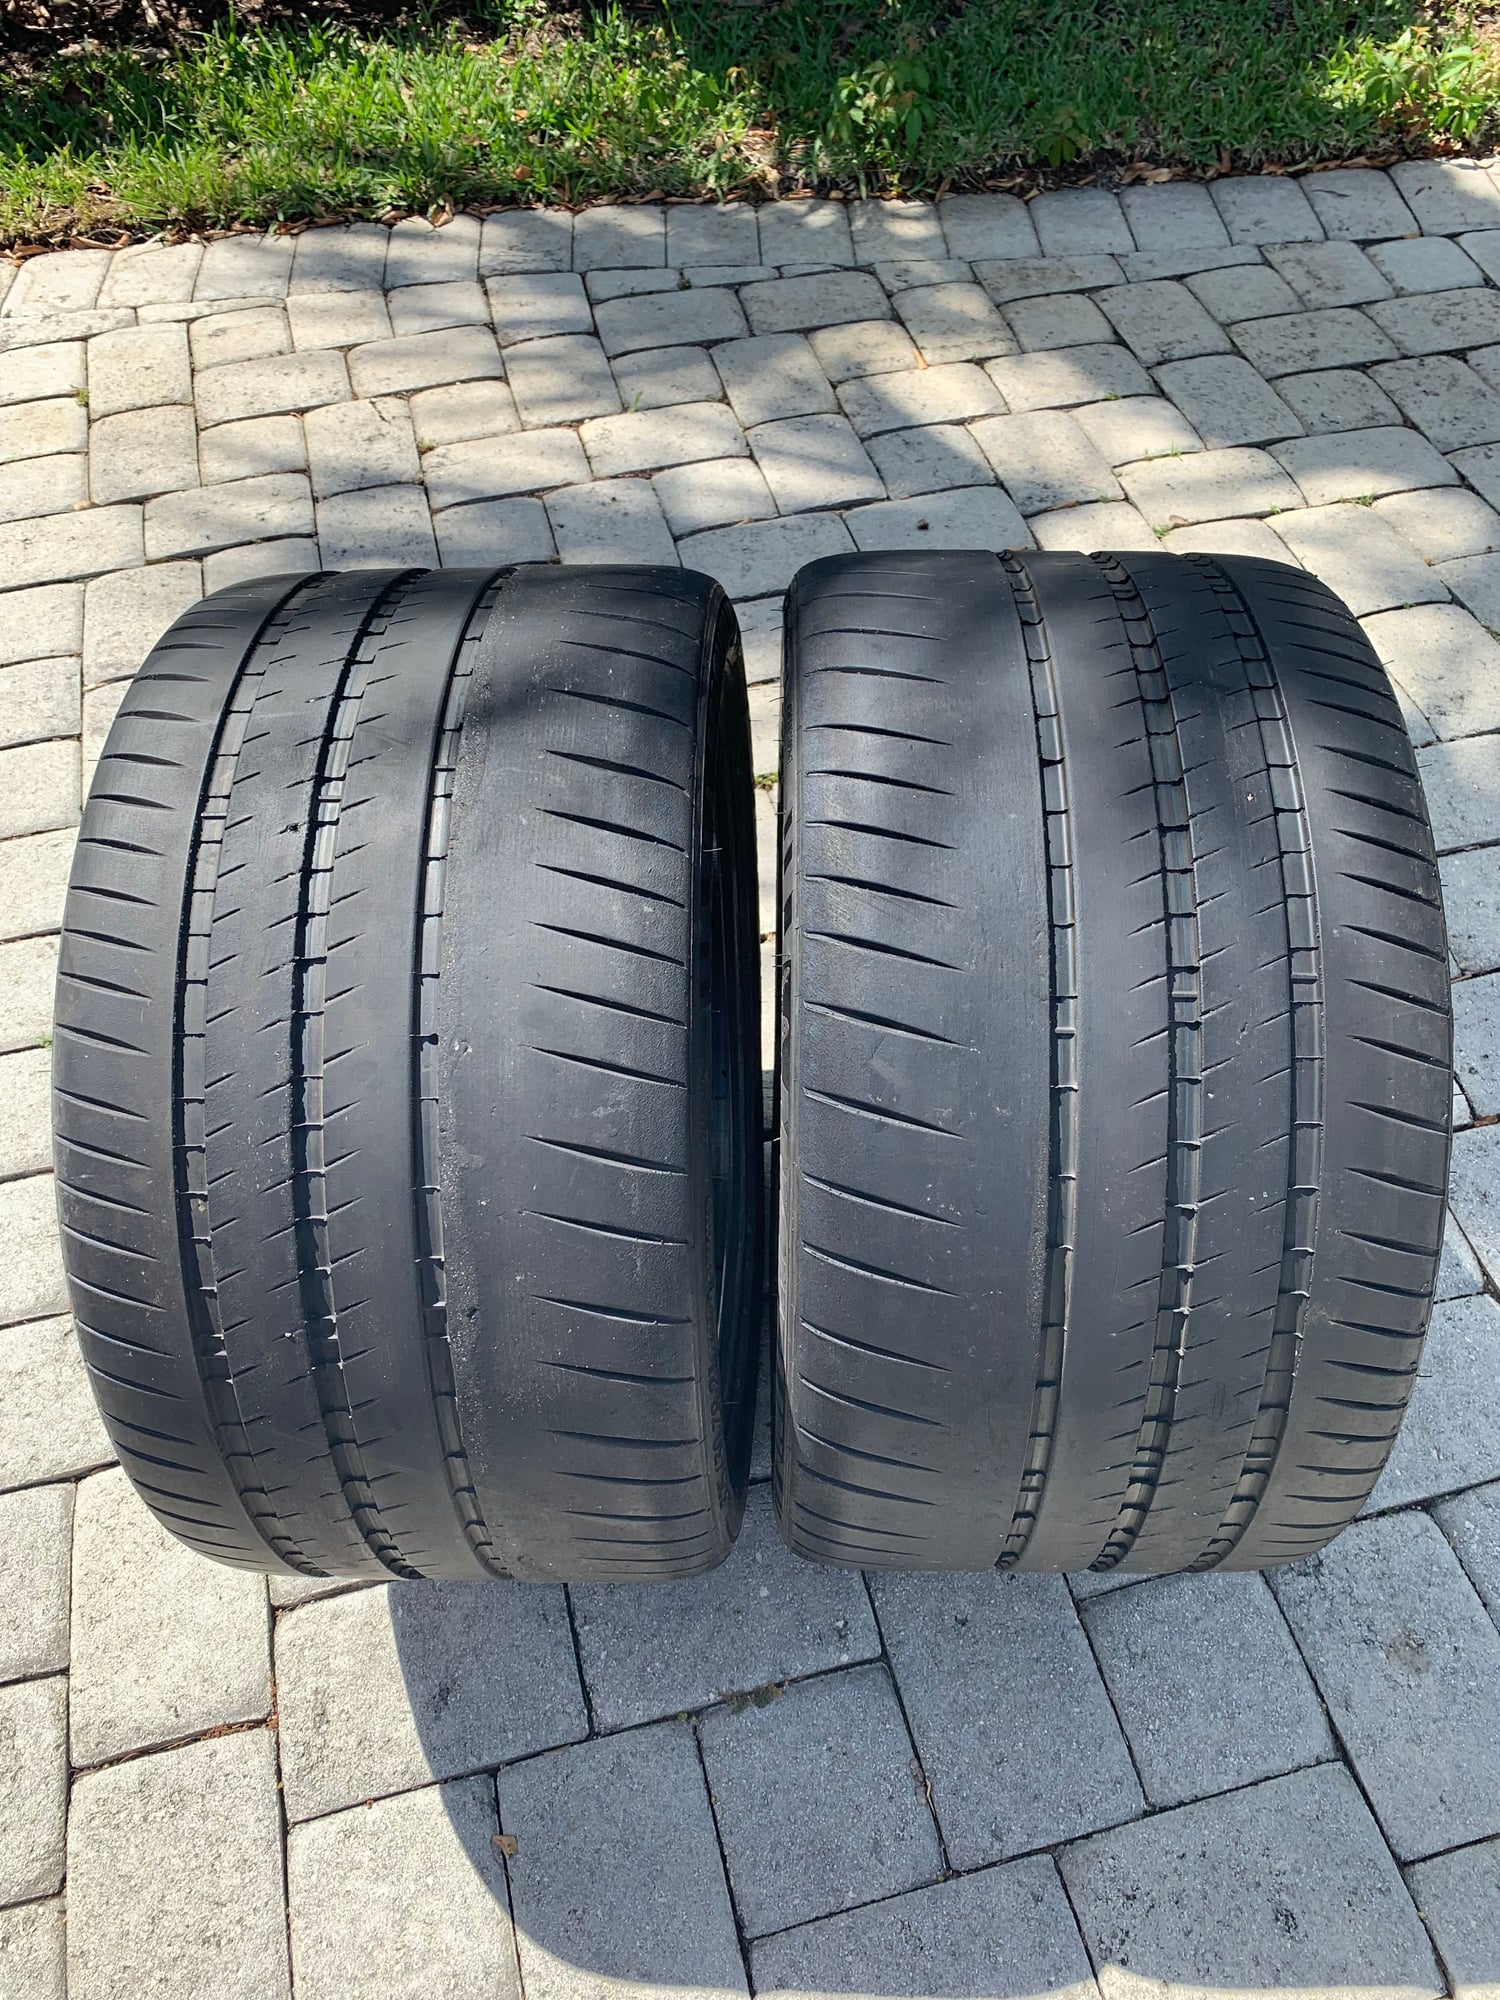 Wheels and Tires/Axles - Michelin Cup 2 tires for GT3RS wheels - Used - 2014 to 2019 Porsche GT3 - West Palm Beach, FL 33410, United States